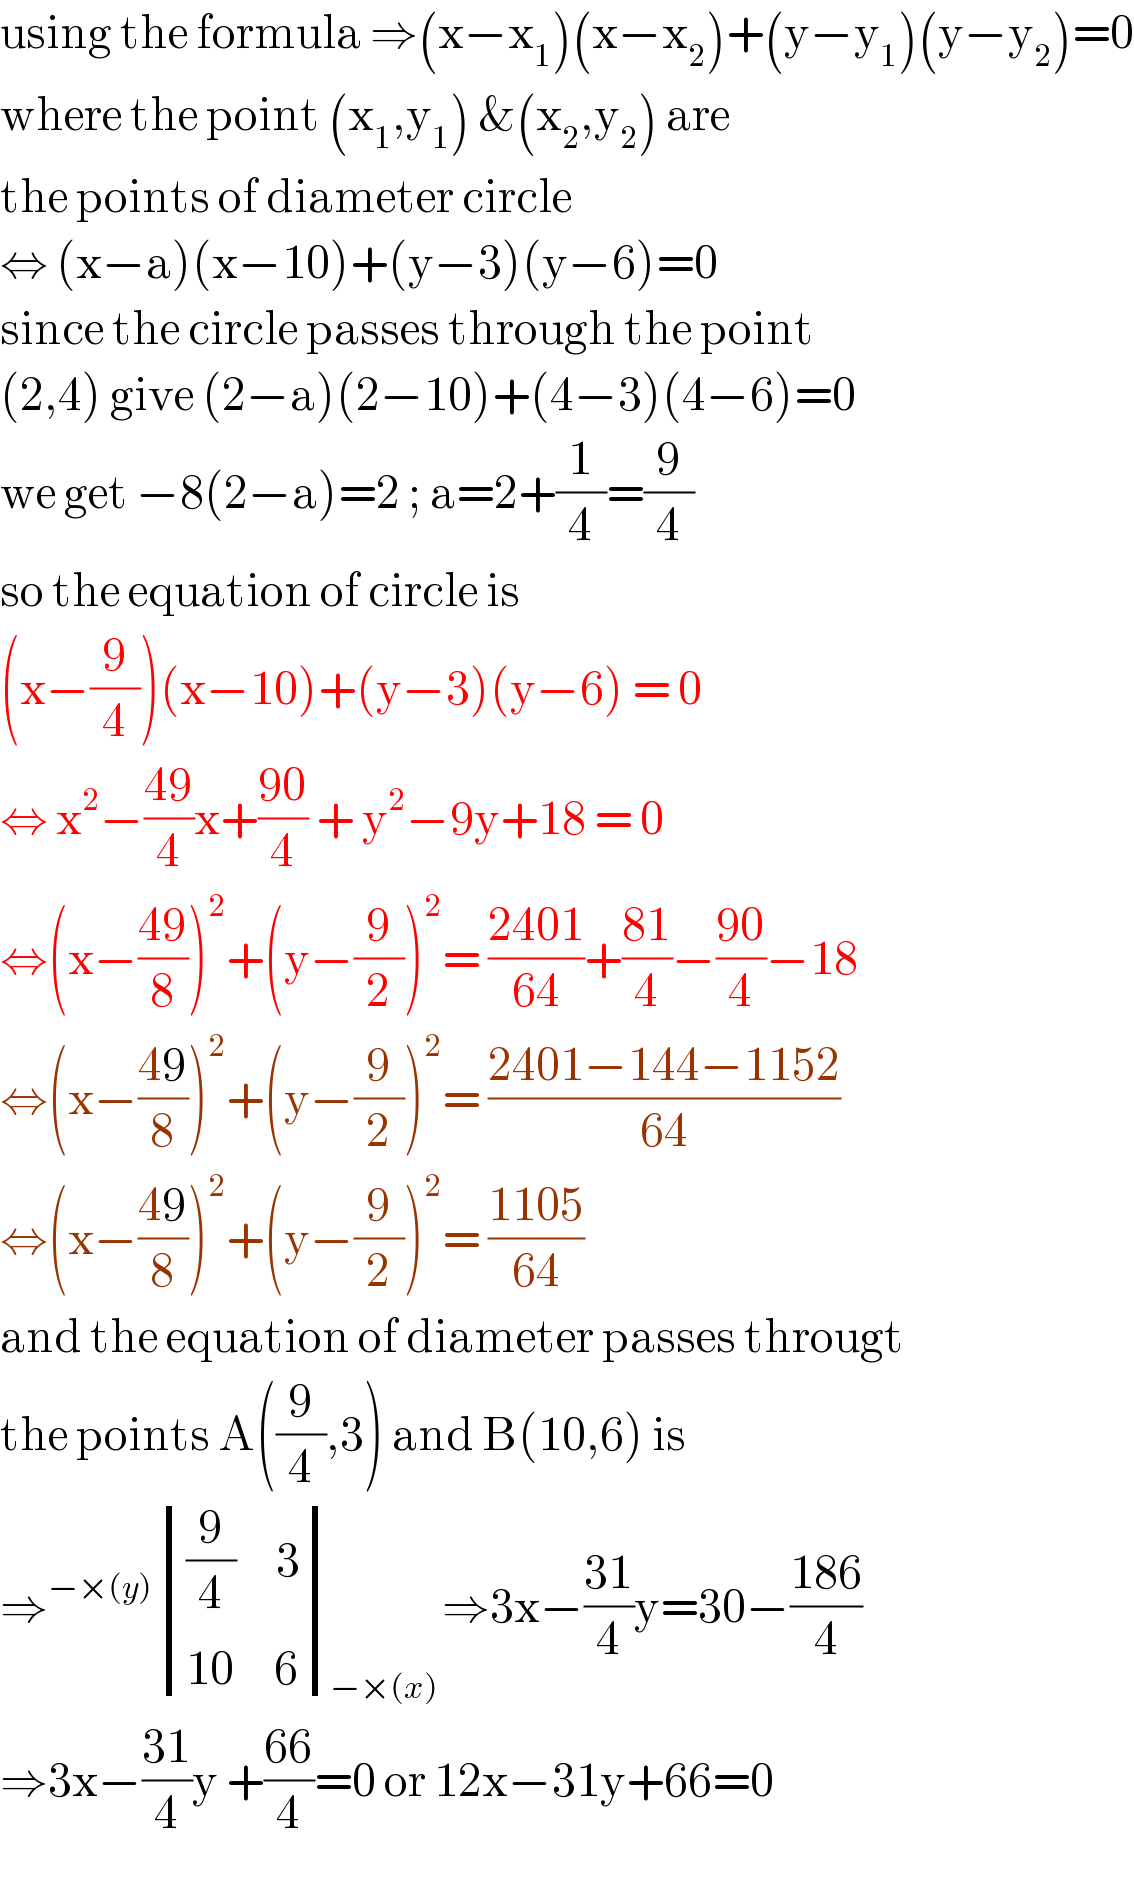 using the formula ⇒(x−x_1 )(x−x_2 )+(y−y_1 )(y−y_2 )=0  where the point (x_1 ,y_1 ) &(x_2 ,y_2 ) are   the points of diameter circle  ⇔ (x−a)(x−10)+(y−3)(y−6)=0  since the circle passes through the point  (2,4) give (2−a)(2−10)+(4−3)(4−6)=0  we get −8(2−a)=2 ; a=2+(1/4)=(9/4)  so the equation of circle is   (x−(9/4))(x−10)+(y−3)(y−6) = 0  ⇔ x^2 −((49)/4)x+((90)/4) + y^2 −9y+18 = 0  ⇔(x−((49)/8))^2 +(y−(9/2))^2 = ((2401)/(64))+((81)/4)−((90)/4)−18  ⇔(x−((49)/8))^2 +(y−(9/2))^2 = ((2401−144−1152)/(64))  ⇔(x−((49)/8))^2 +(y−(9/2))^2 = ((1105)/(64))  and the equation of diameter passes througt  the points A((9/4),3) and B(10,6) is   ⇒^(−×(y))  determinant ((((9/4)     3)),((10     6)))_(−×(x)) ⇒3x−((31)/4)y=30−((186)/4)  ⇒3x−((31)/4)y +((66)/4)=0 or 12x−31y+66=0  